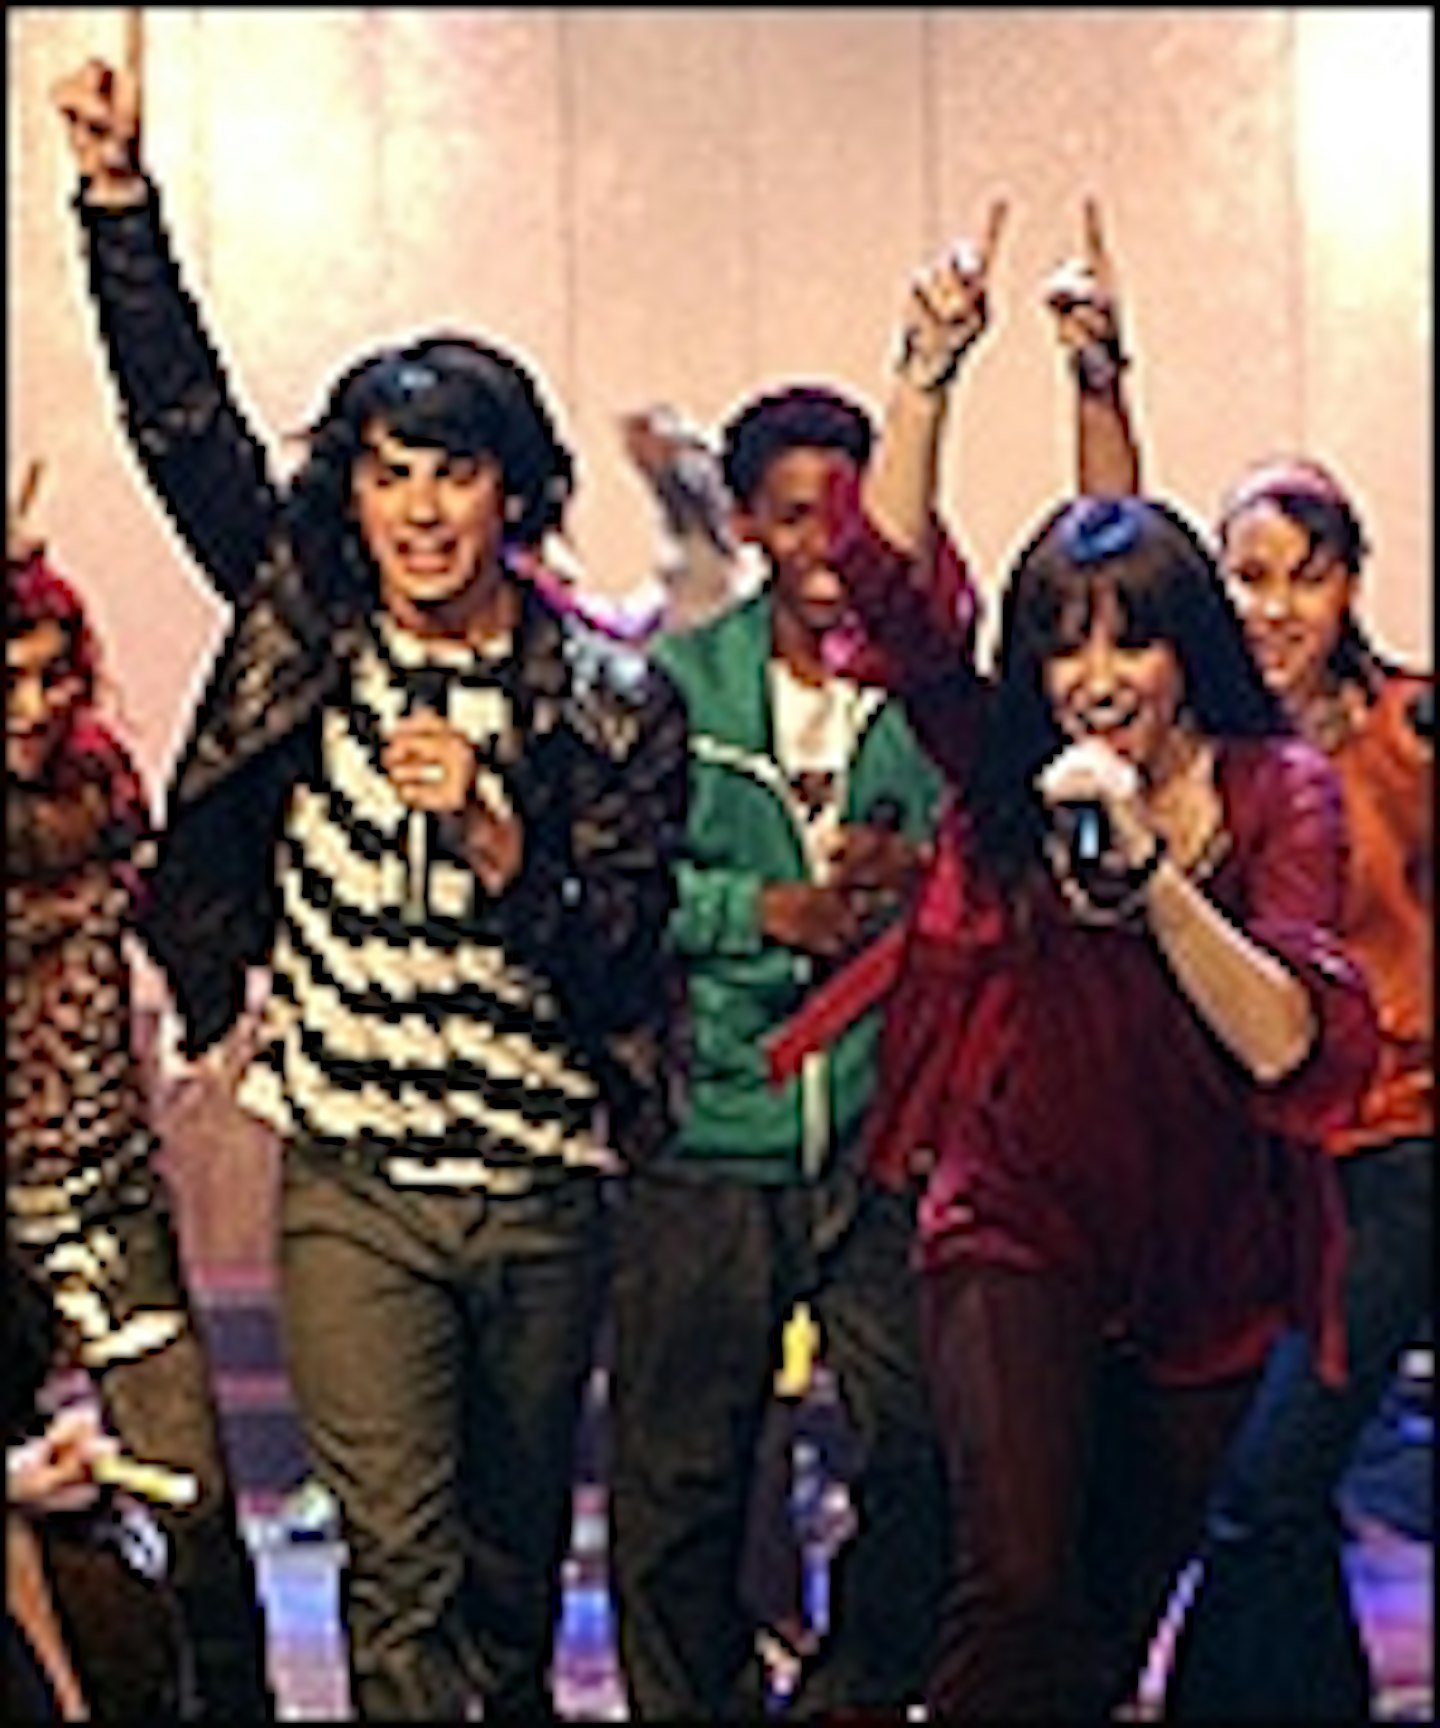 Camp Rock 2 Starts Production